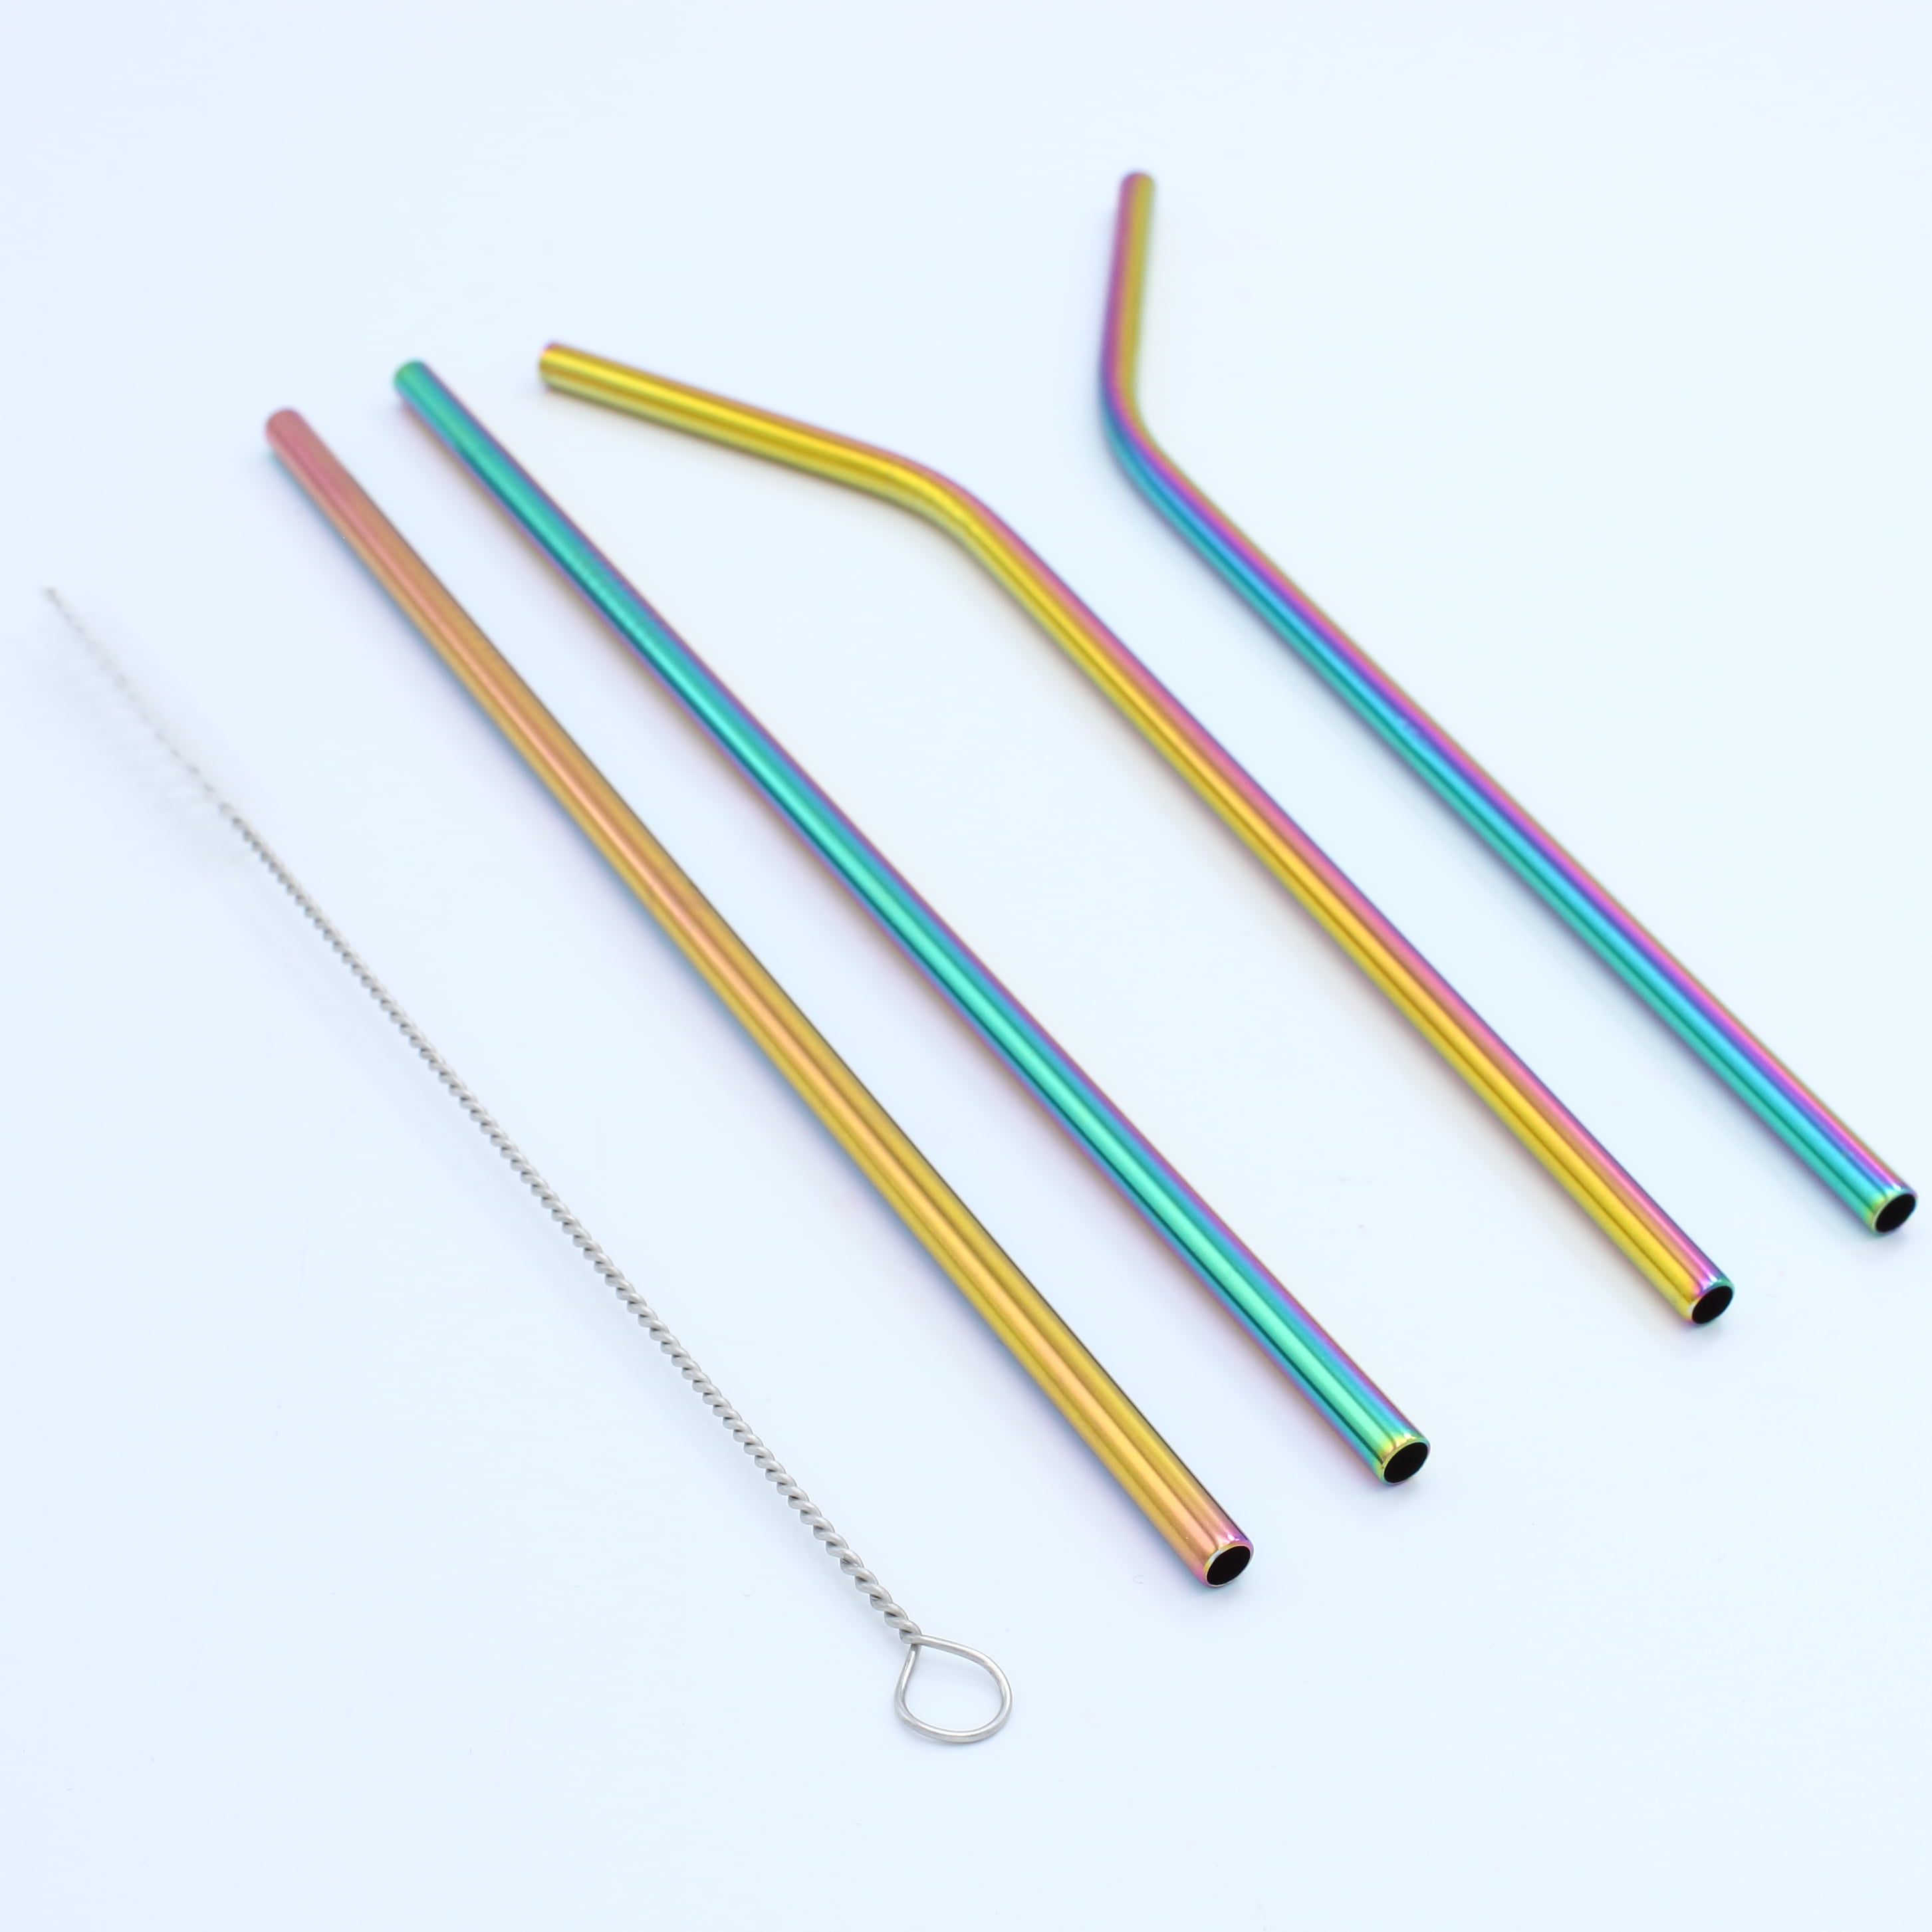 8.5 inch Stainless Steel Straw Portable Reusable Multicolor Metal Drinking Straws with Cleaning Brush and Bag,Straight and Bent Set 